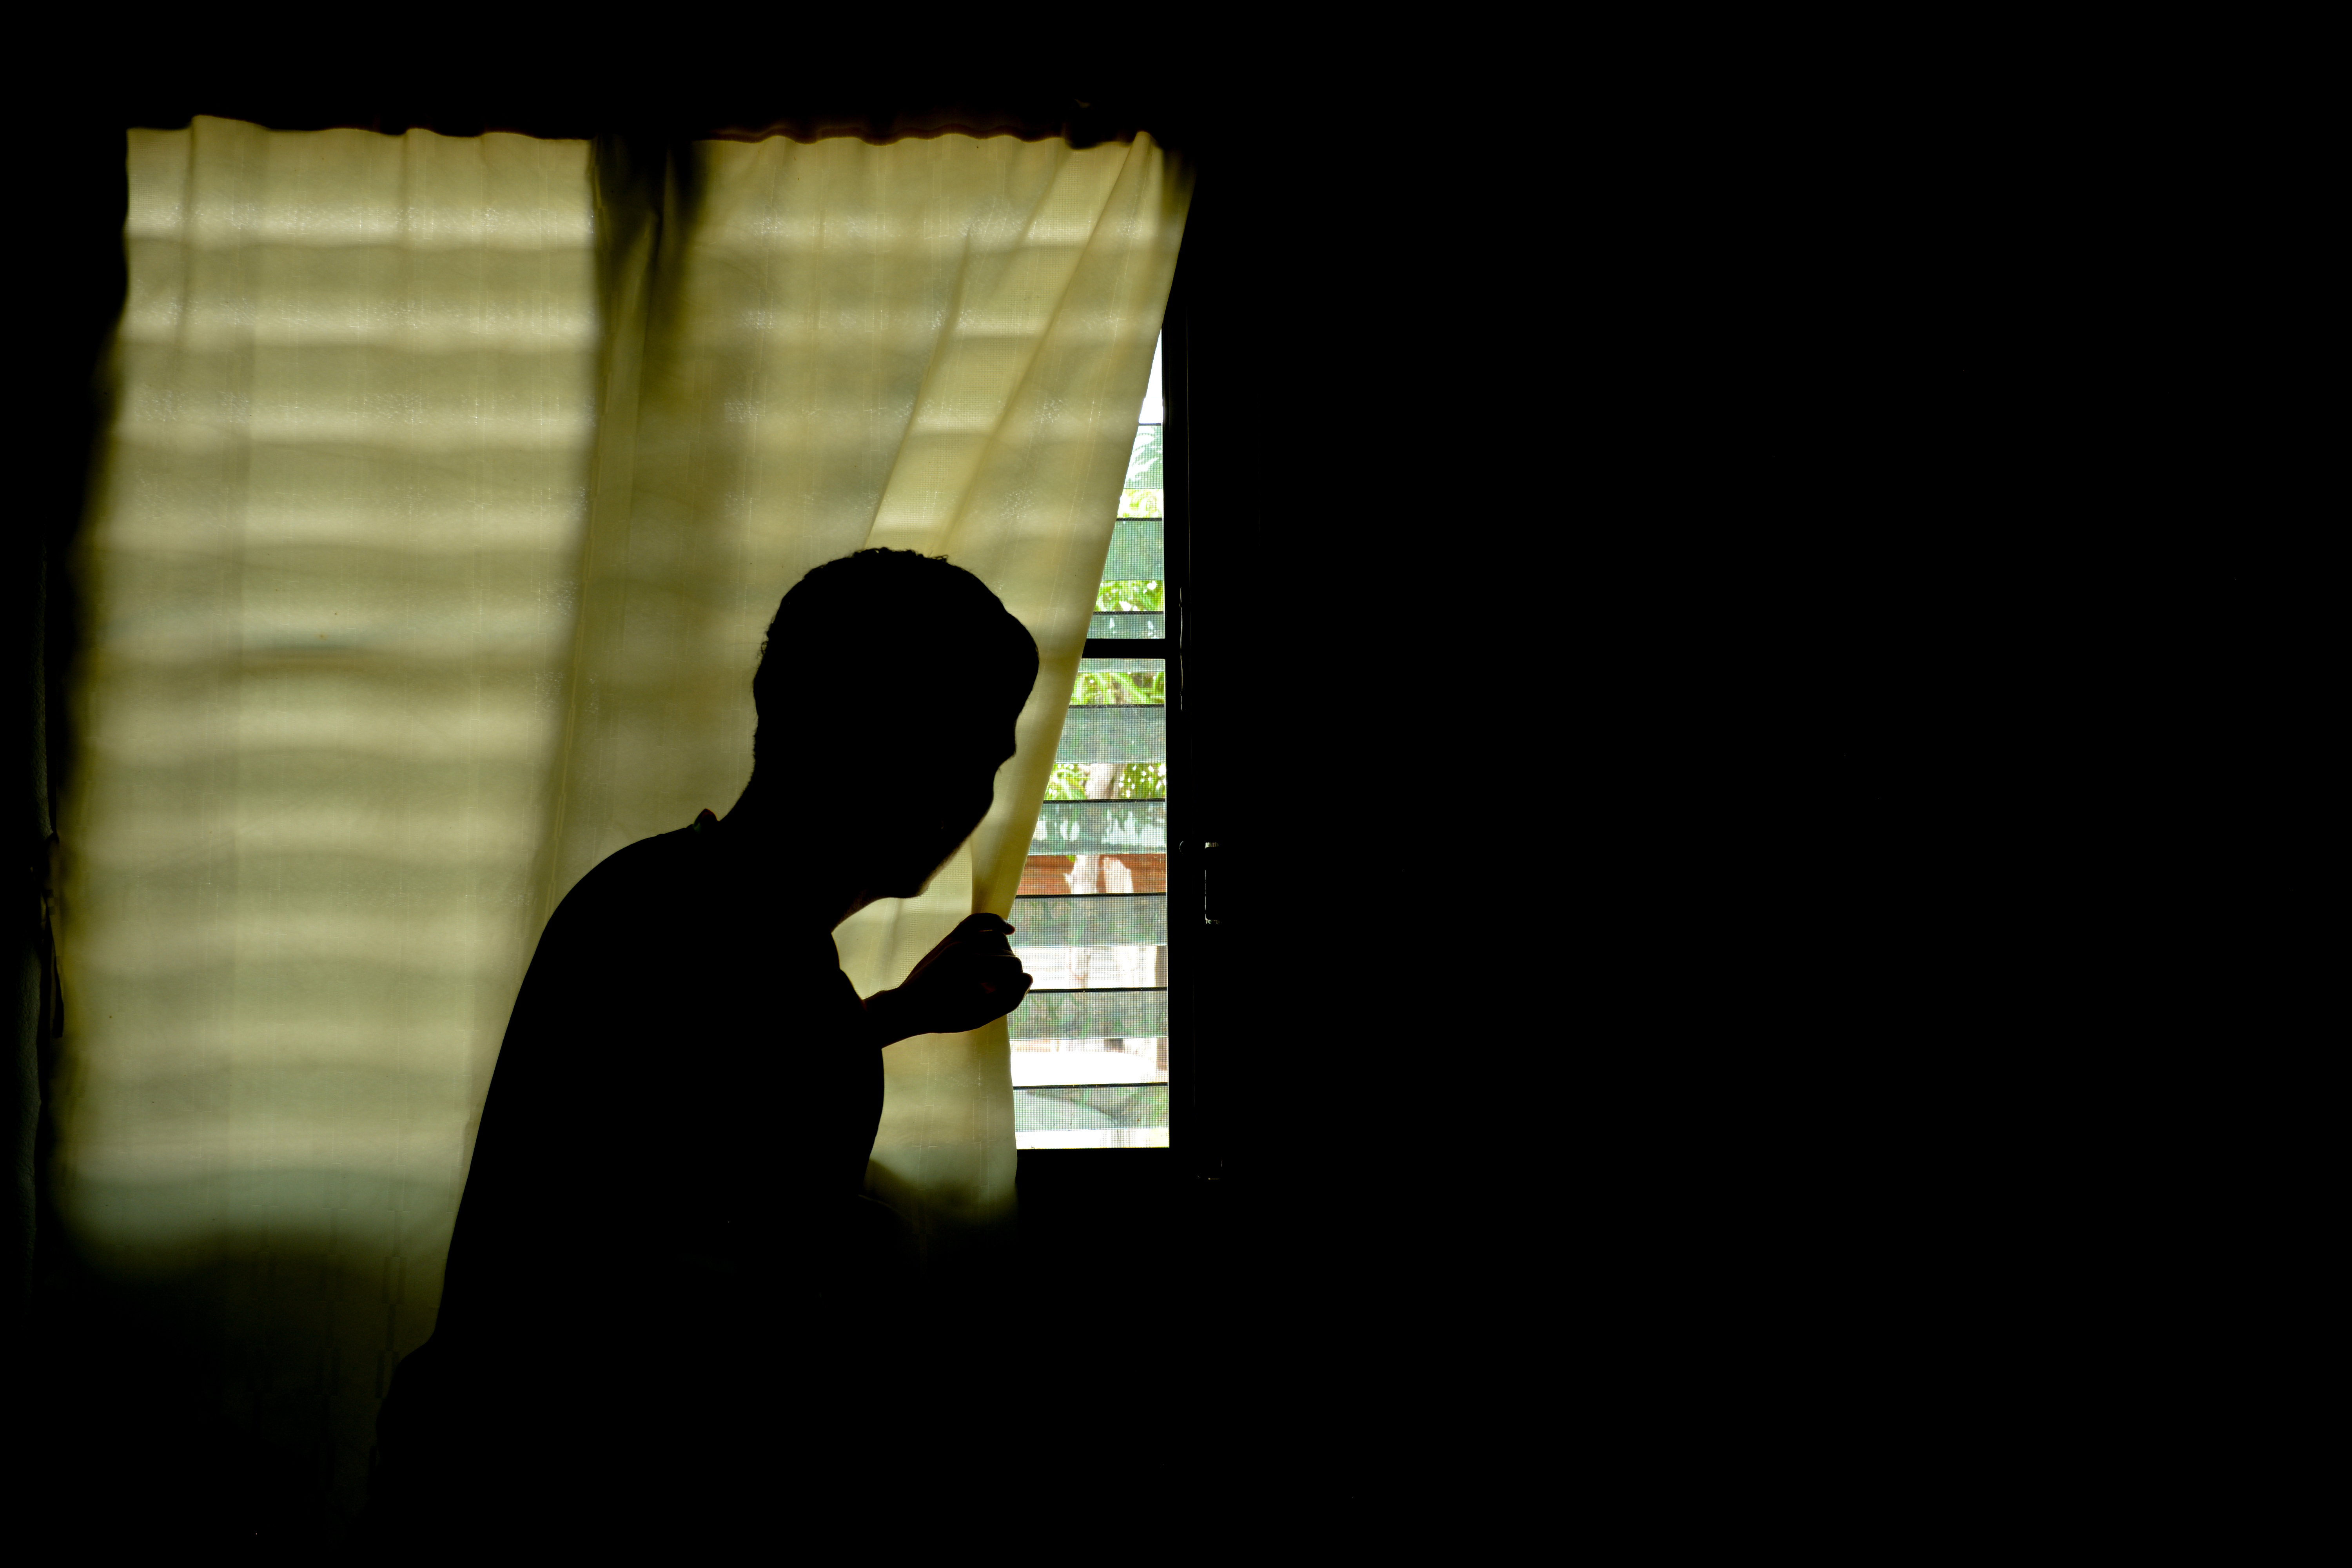 Silhouette man looking out the window with the light in the room. | Source: Shutterstock